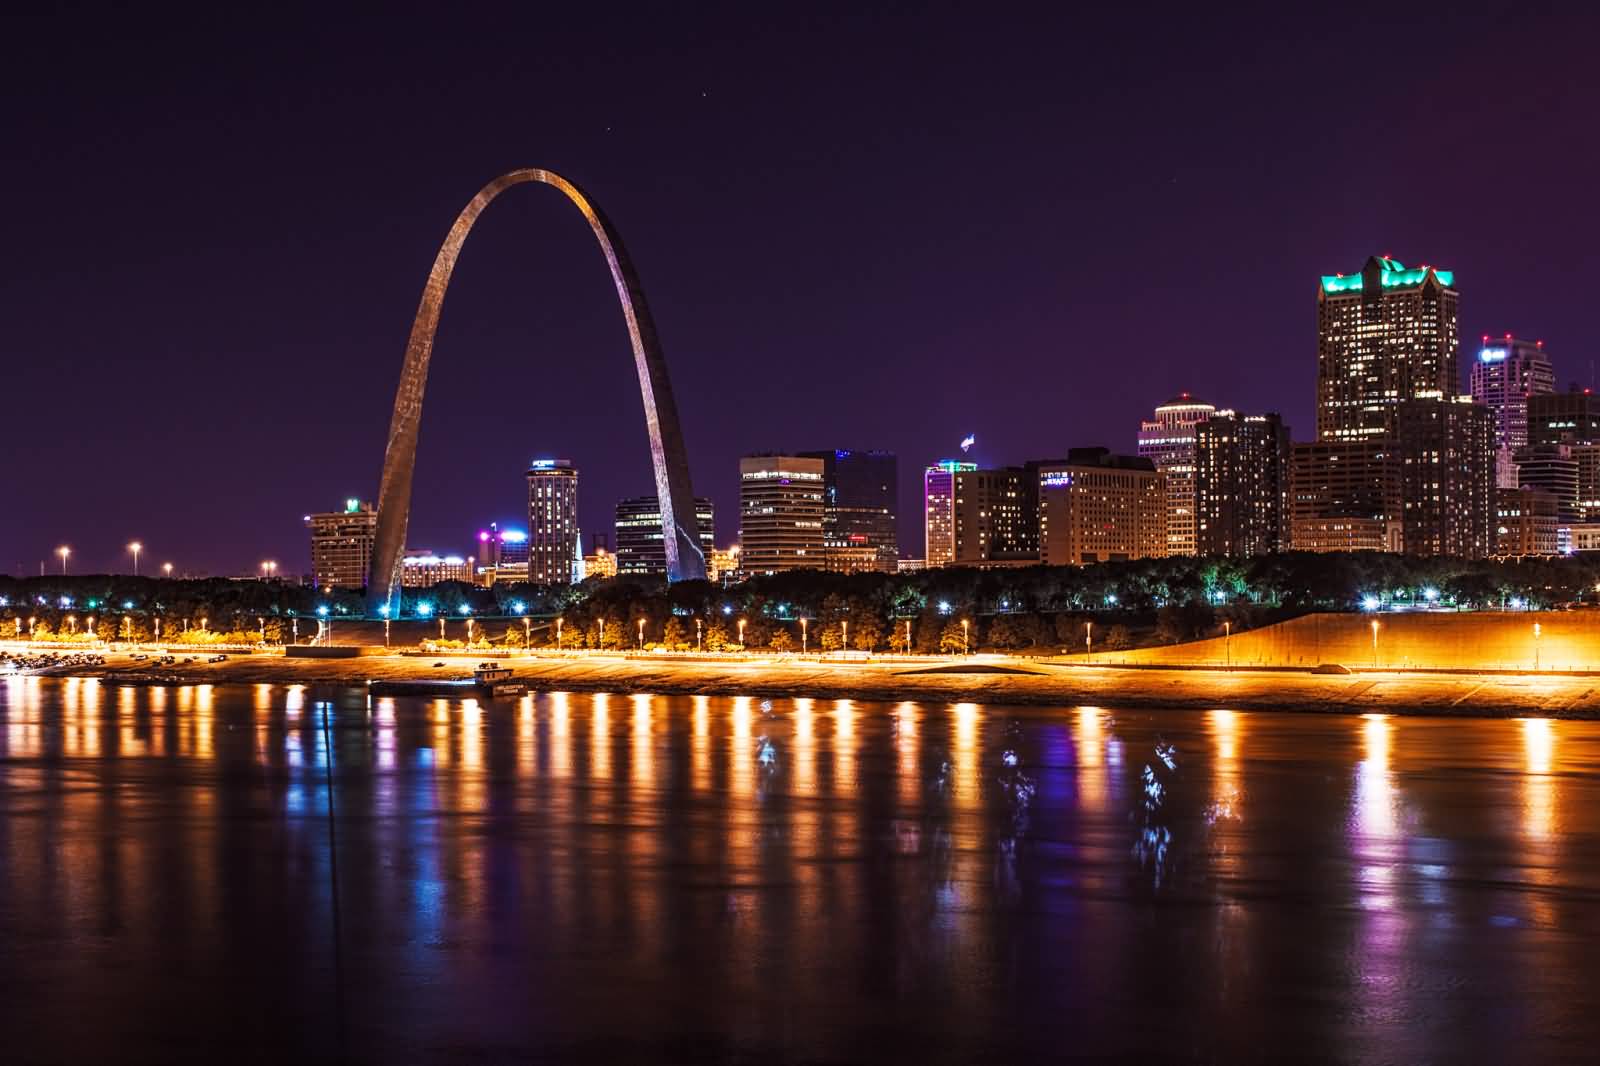 35 Very Beautiful Night Pictures Of The Gateway Arch